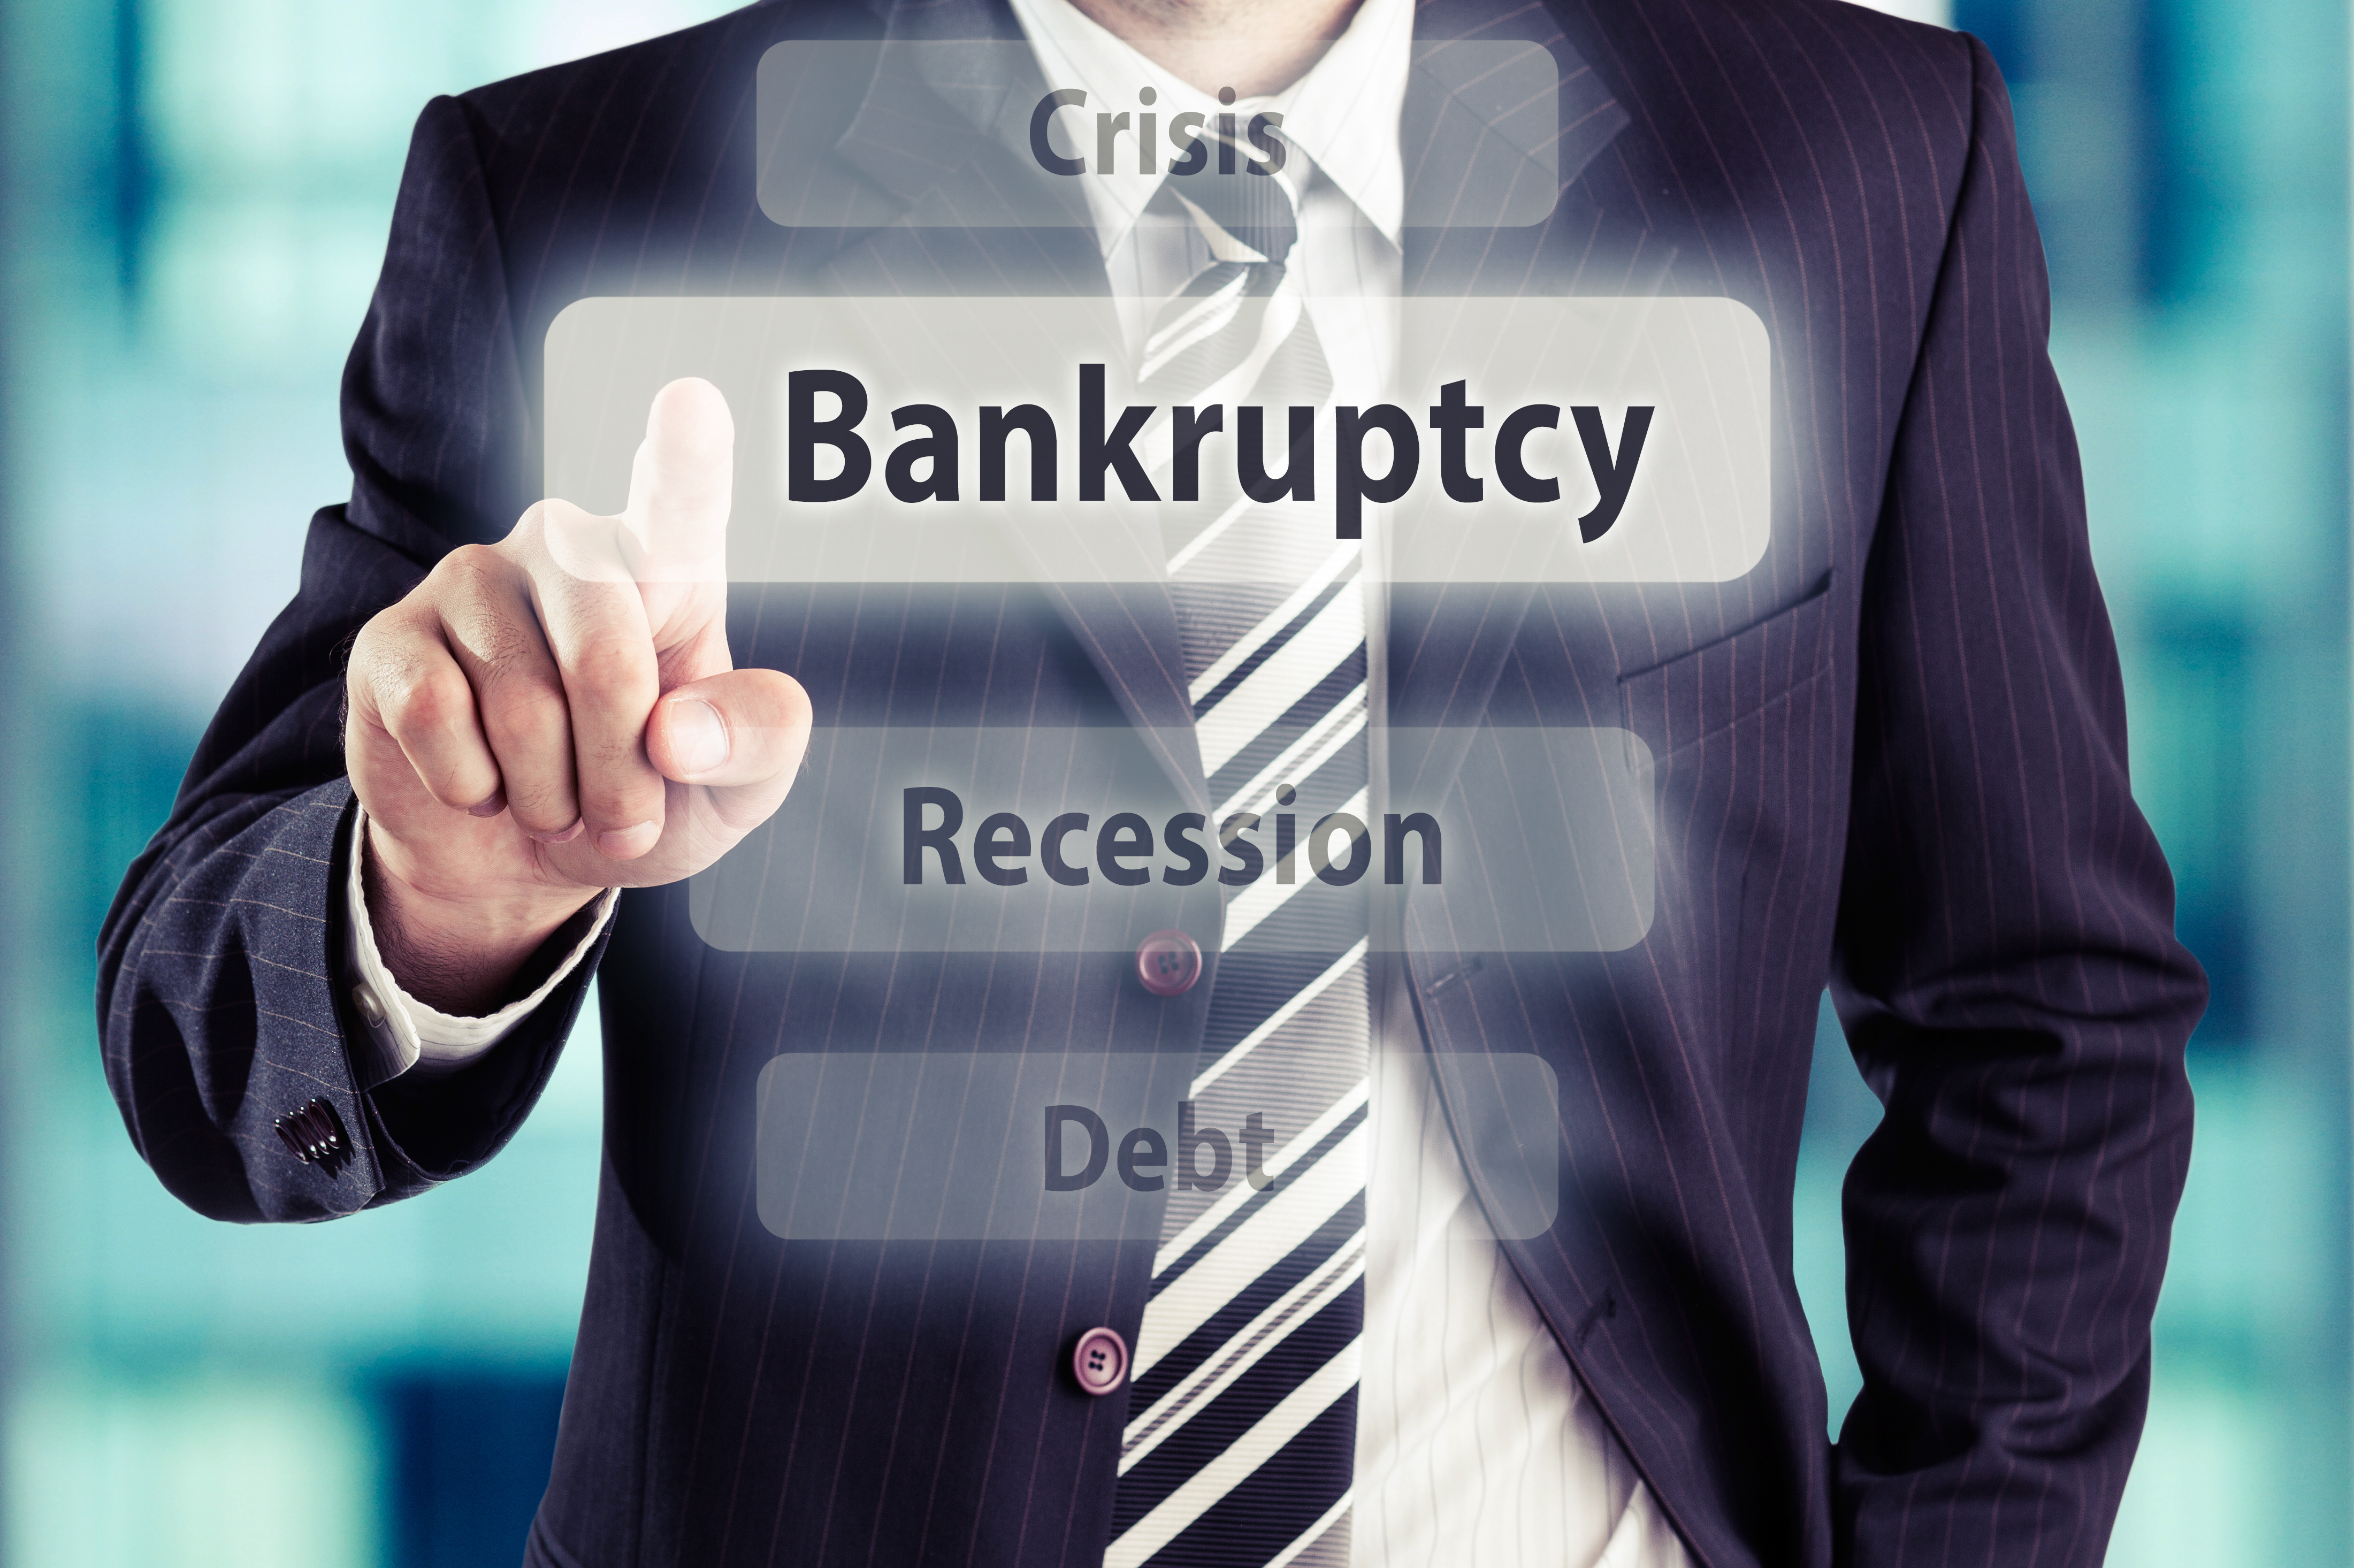 California Bankruptcy Attorneys Price Law Group 866-210-1722